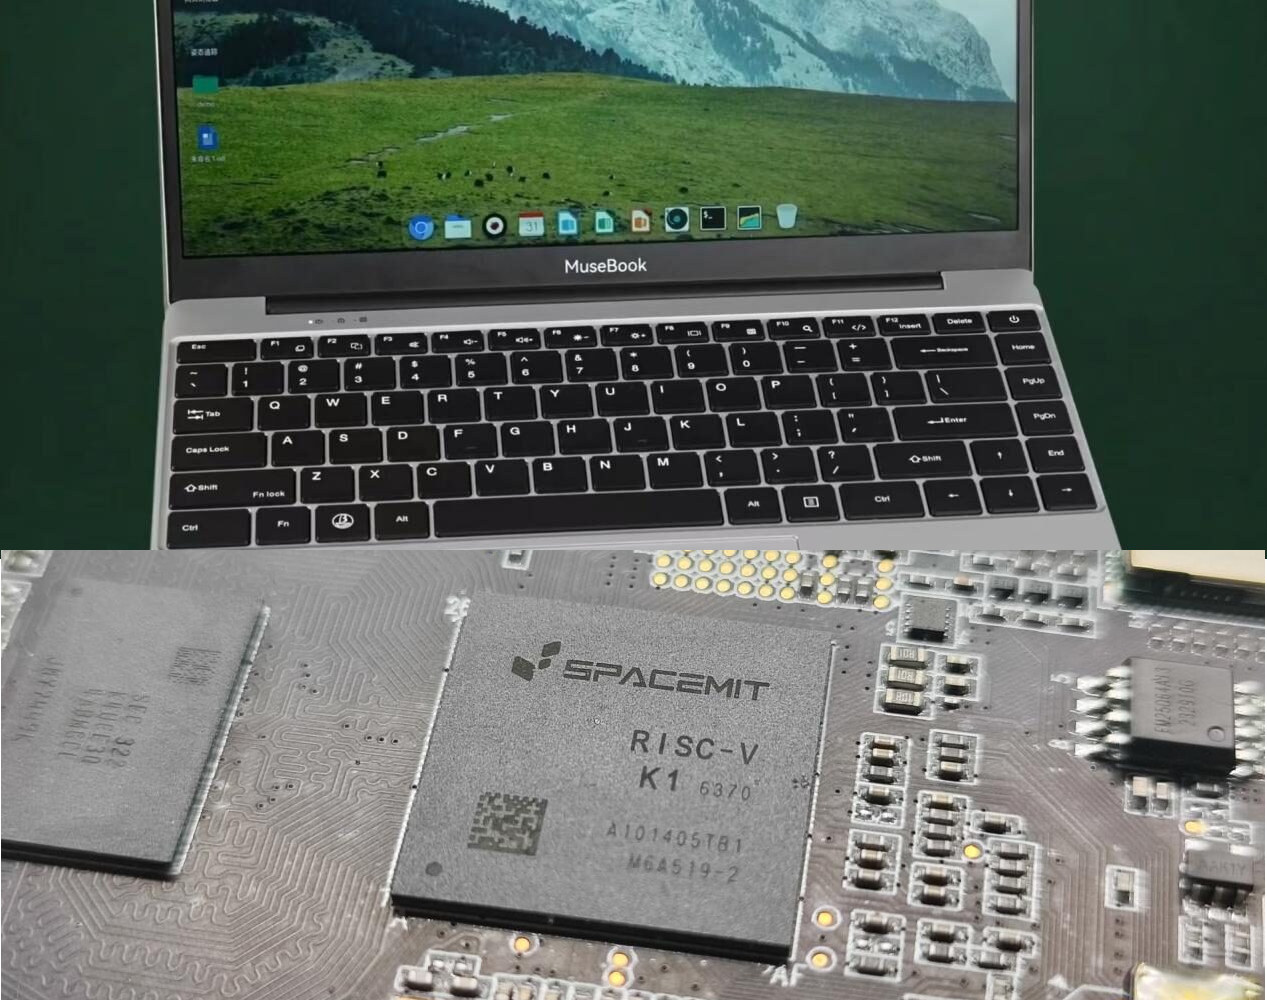 SpacemiT, a chip design company from China with RISC-V as its core technology, recently unveiled the Muse Book laptop based on the K1 octa-core RISC-V